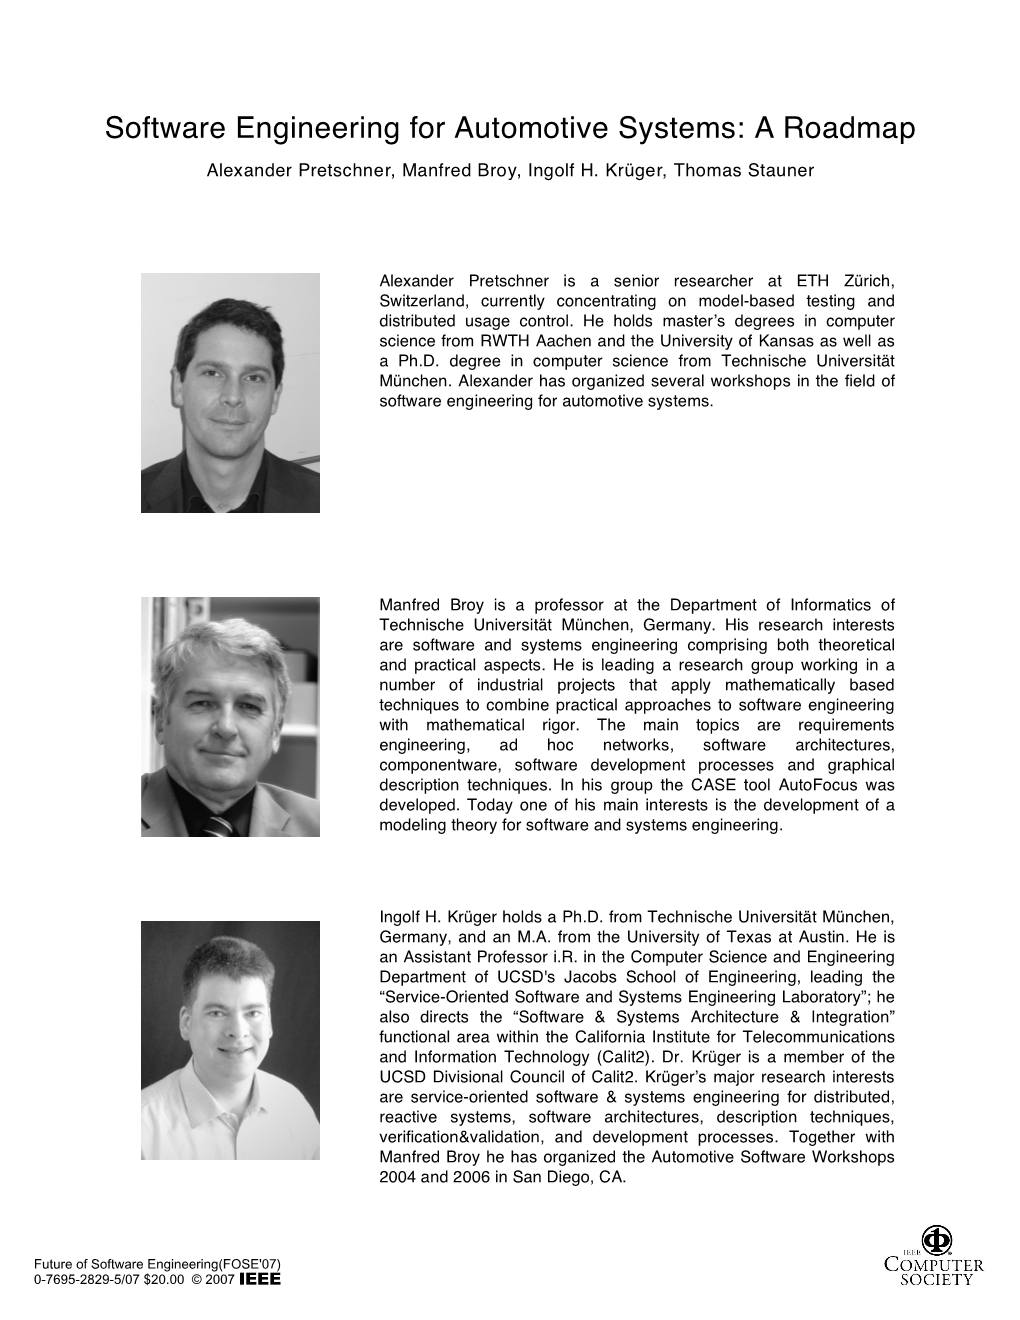 Software Engineering for Automotive Systems: a Roadmap Alexander Pretschner, Manfred Broy, Ingolf H